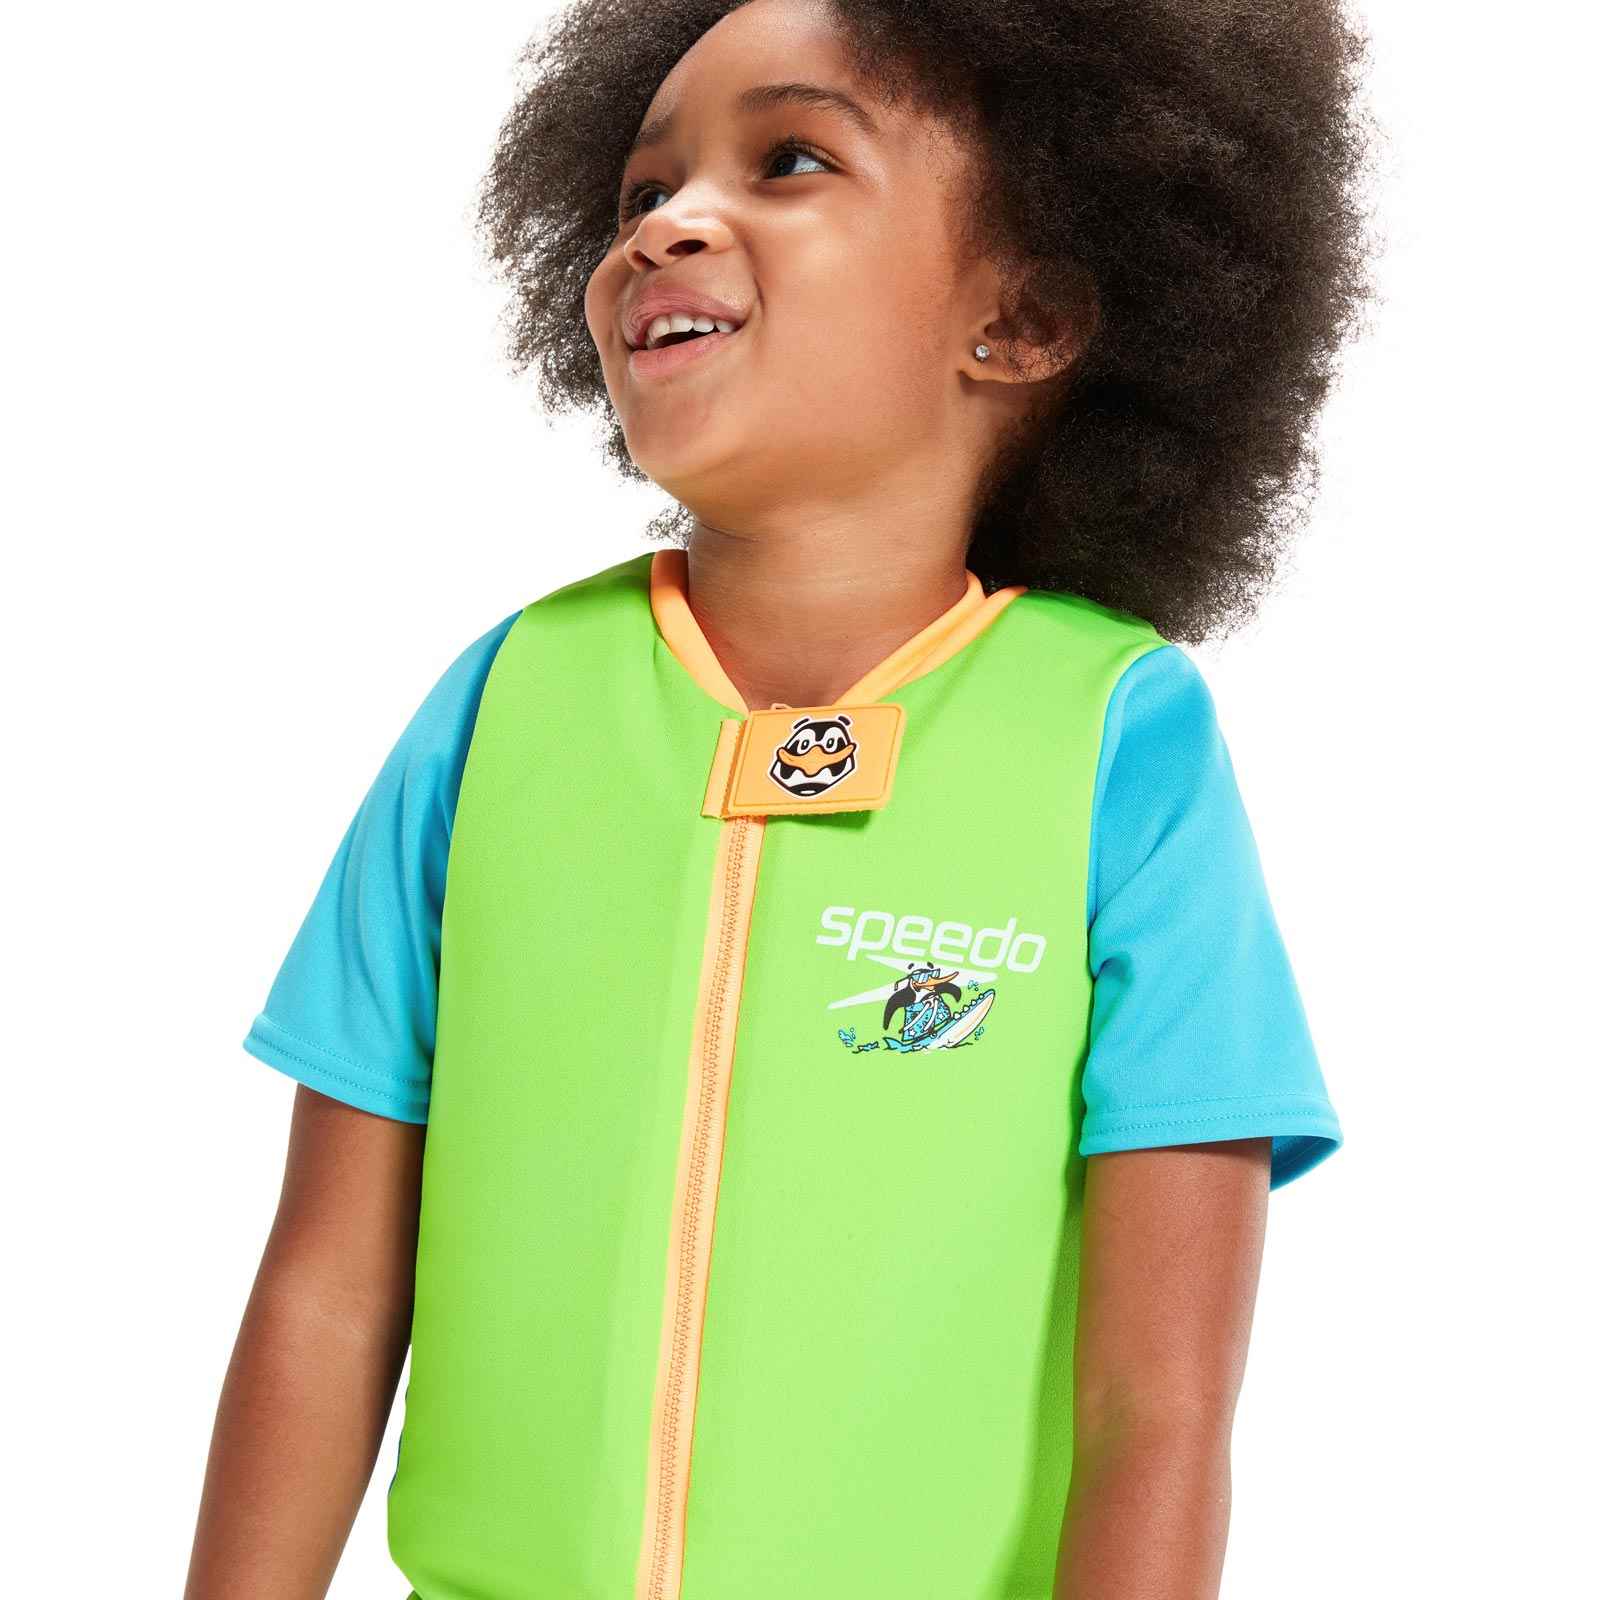 SPEEDO KIDS LEARN TO SWIM CHARACTER PRINTED FLOAT SUIT